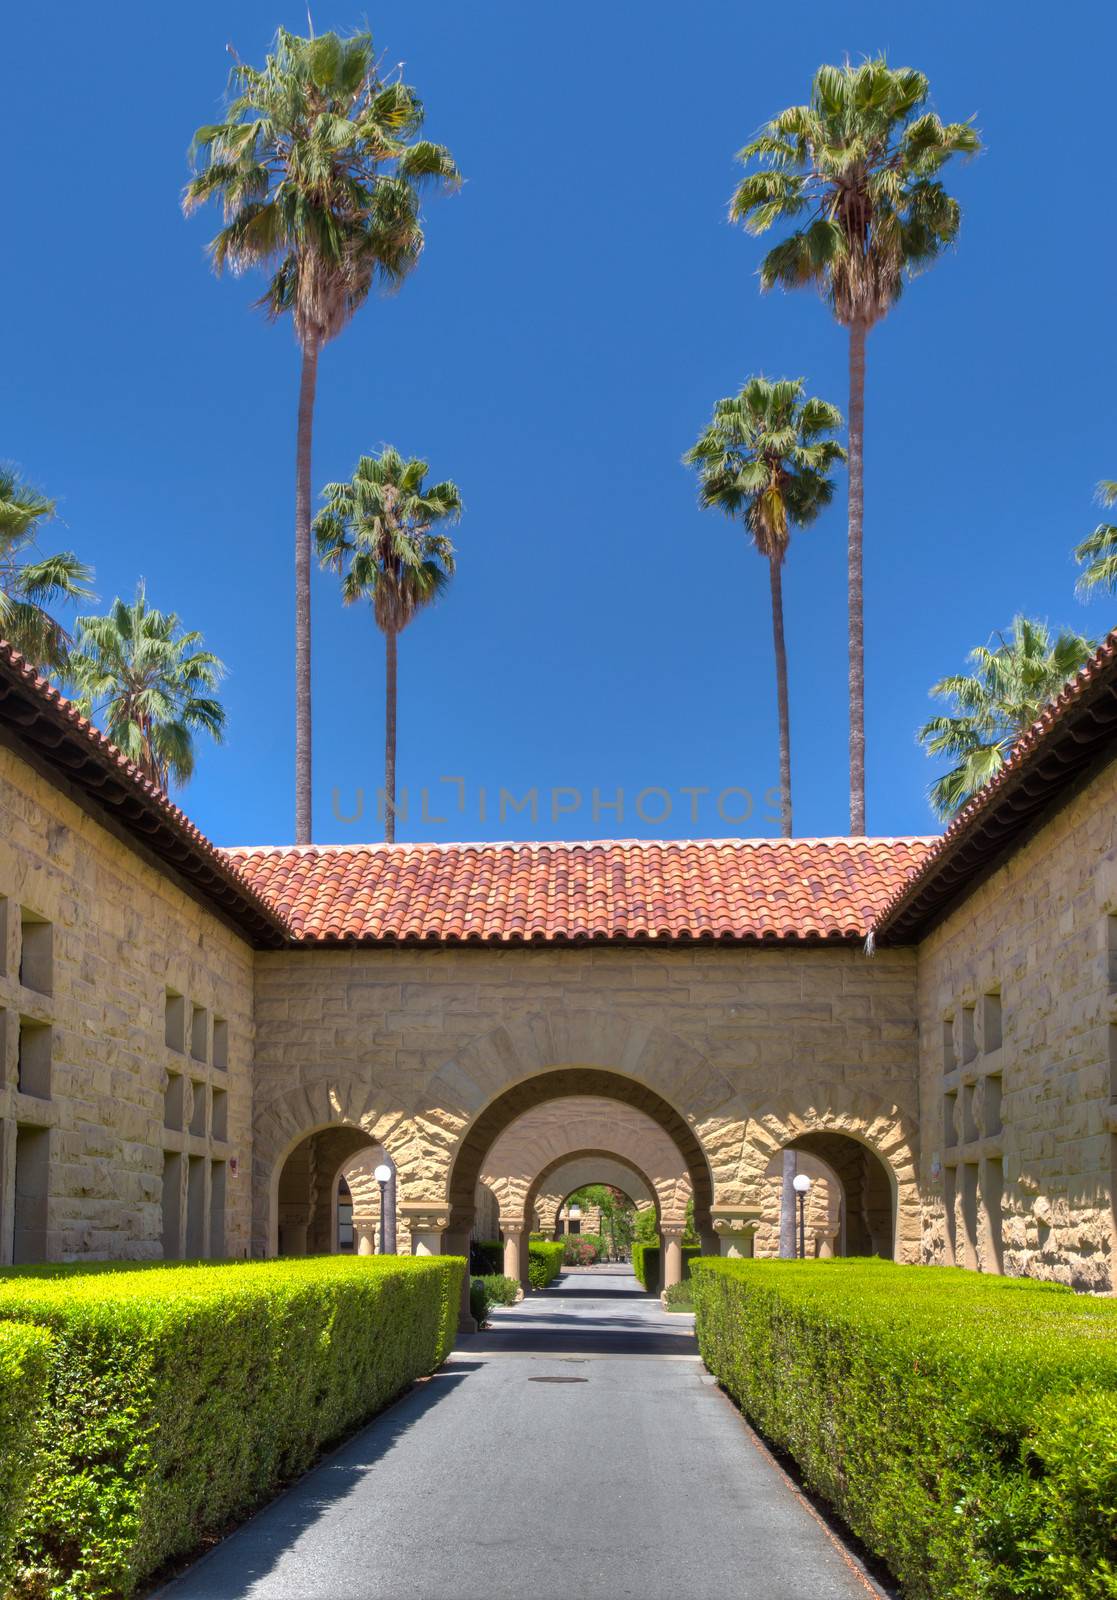 STANFORD, UNITED STATES - July 6: Original walls at Stanford University.  The historic university features original sandstone walls with thick Romanesque features.  July 6, 2013.